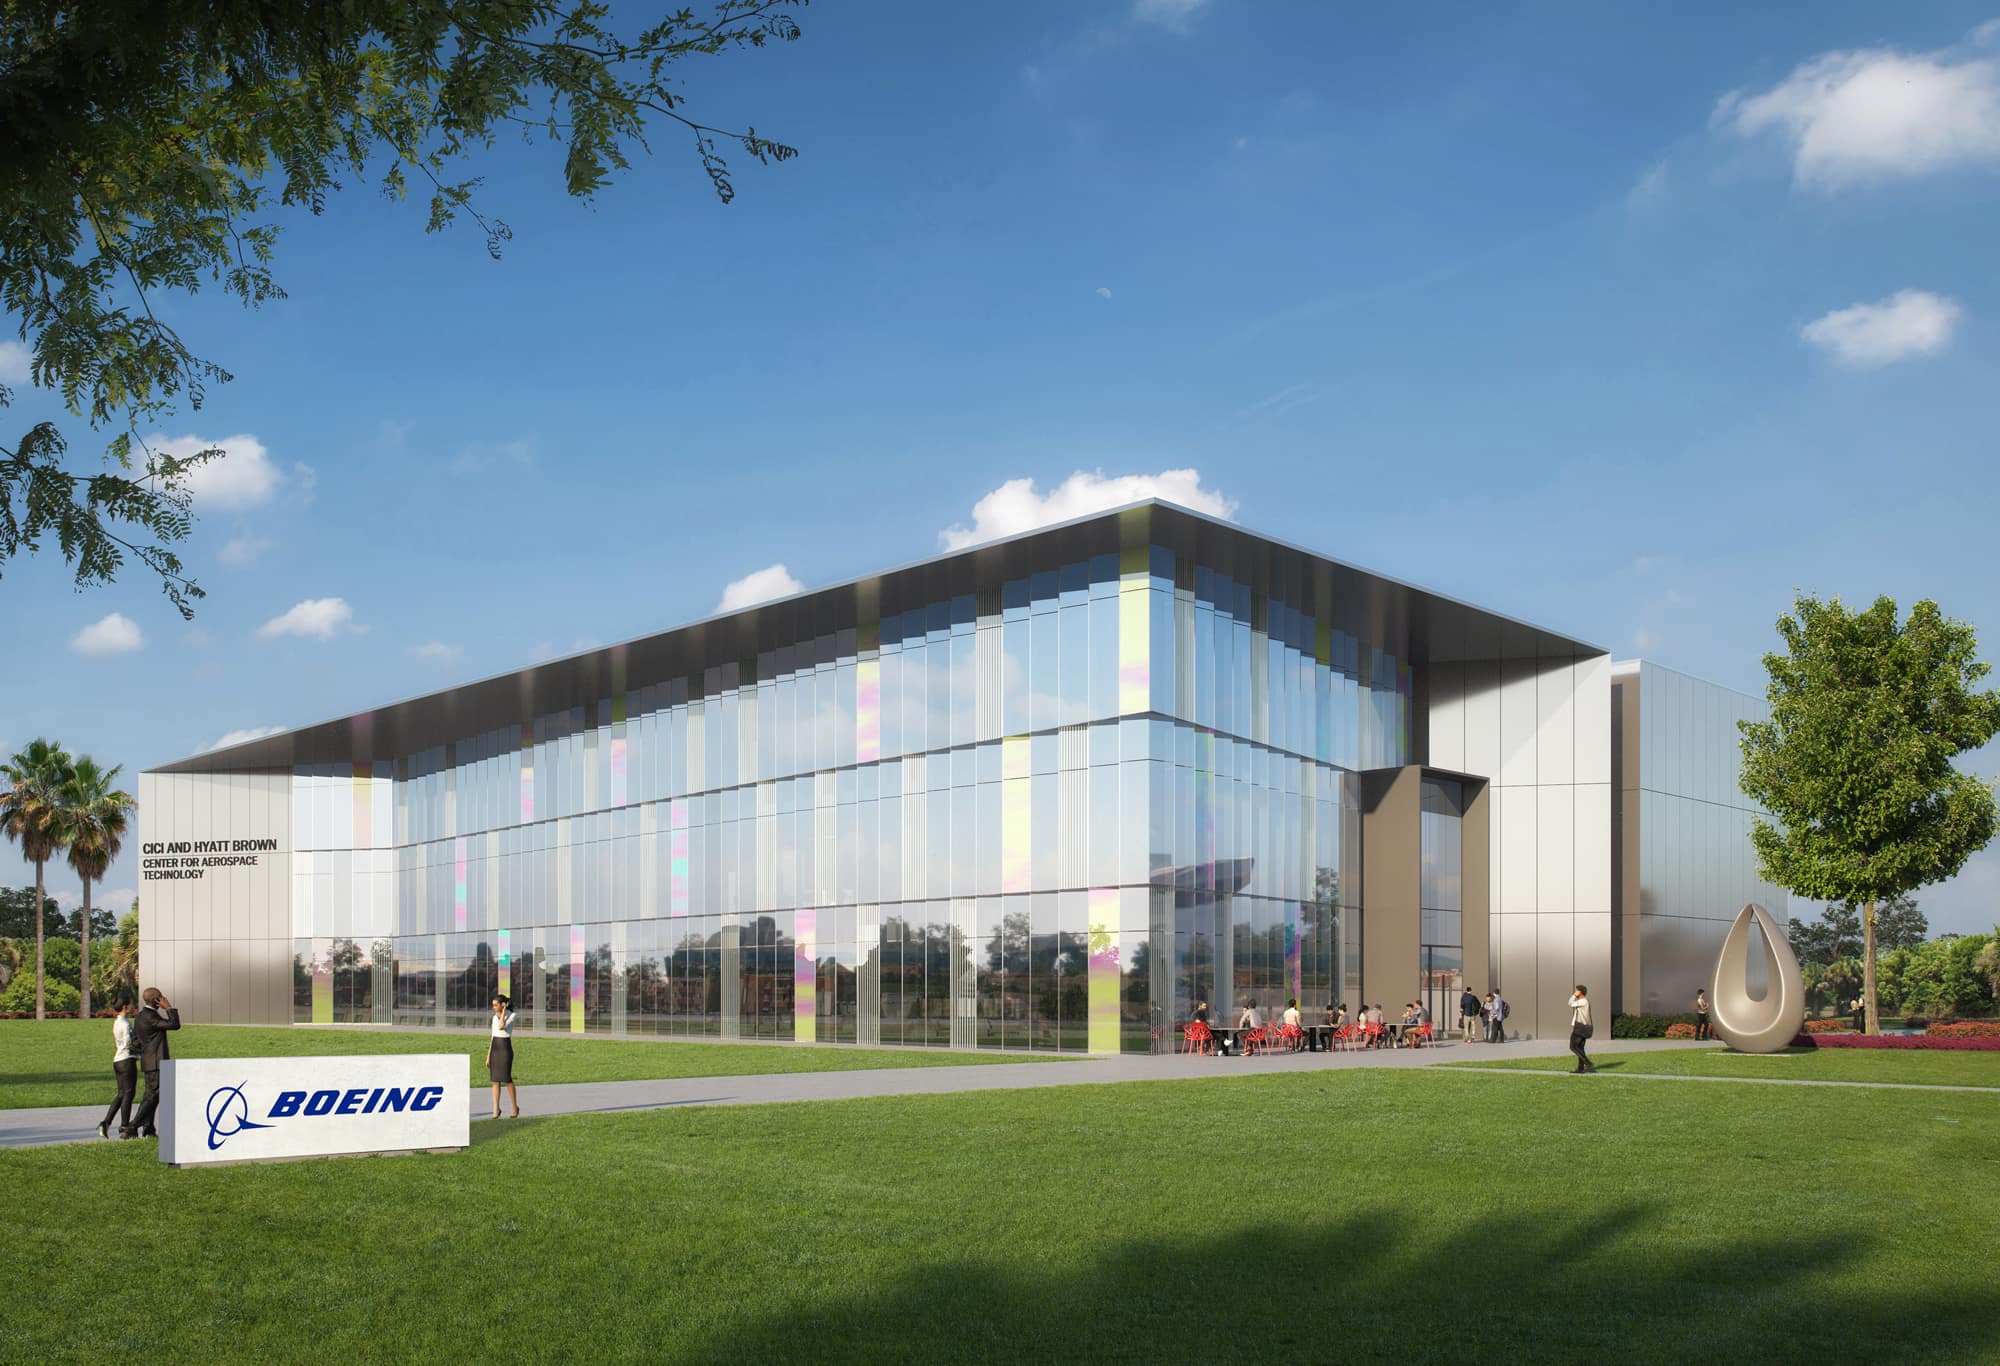 Embry-Riddle announced that Boeing will lease the new Cici and Hyatt Brown Center for Aerospace Technology on June 11, 2024. The center will employ an expected 400 workers, through 2026.